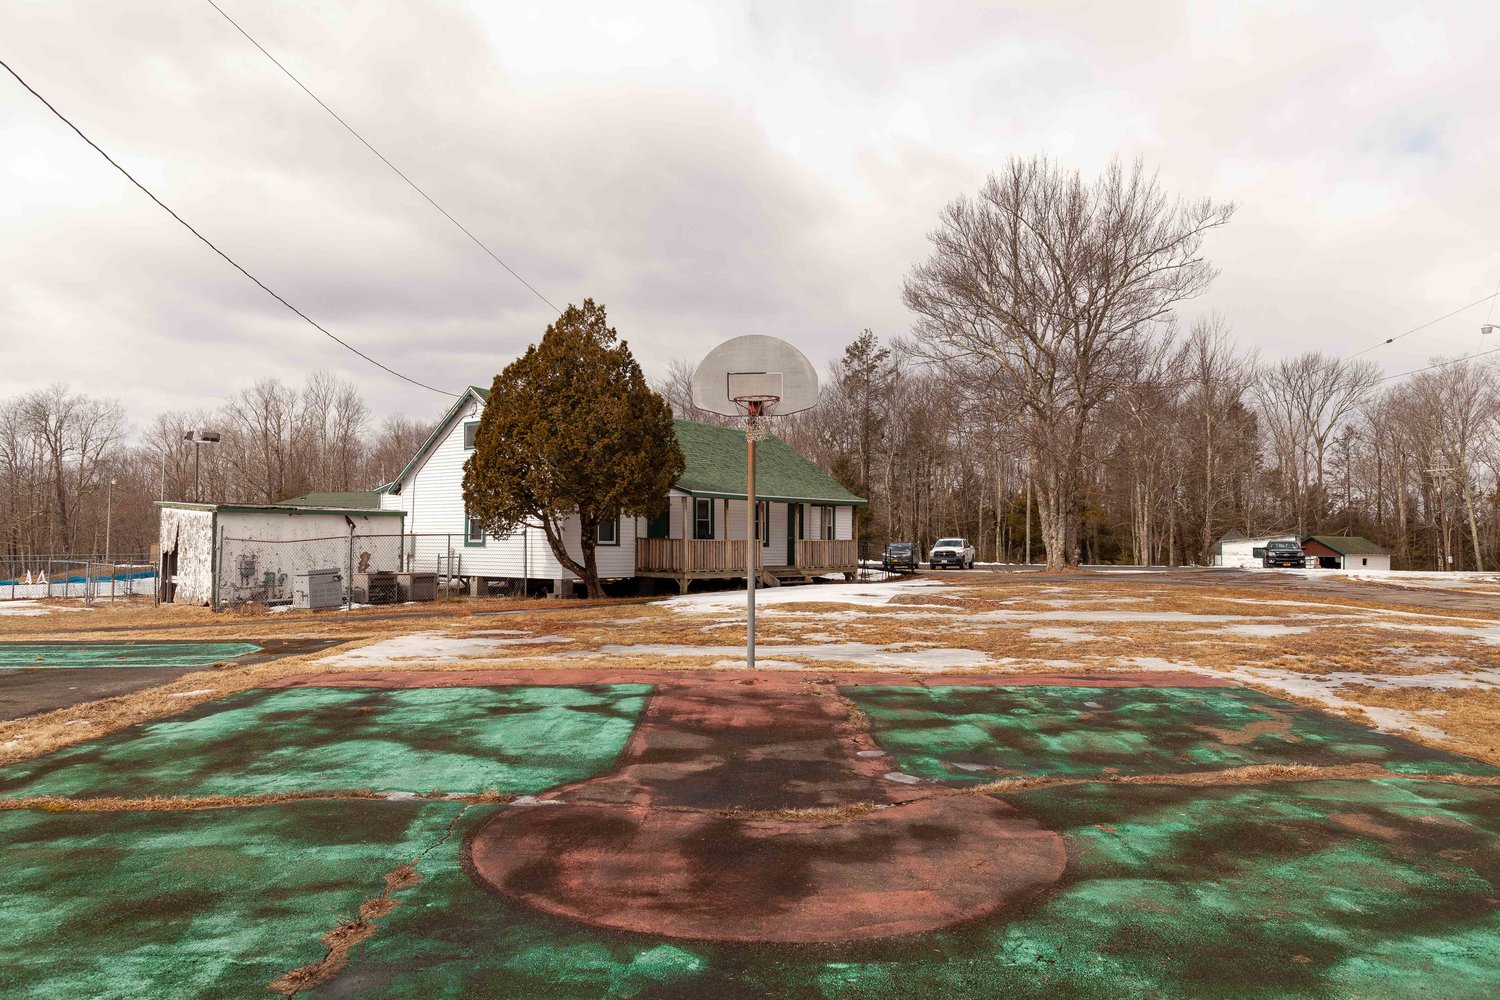 Camp Jened, seen here in 2019, is transforming into the Town of Thompson’s newest town park as renovations are underway.